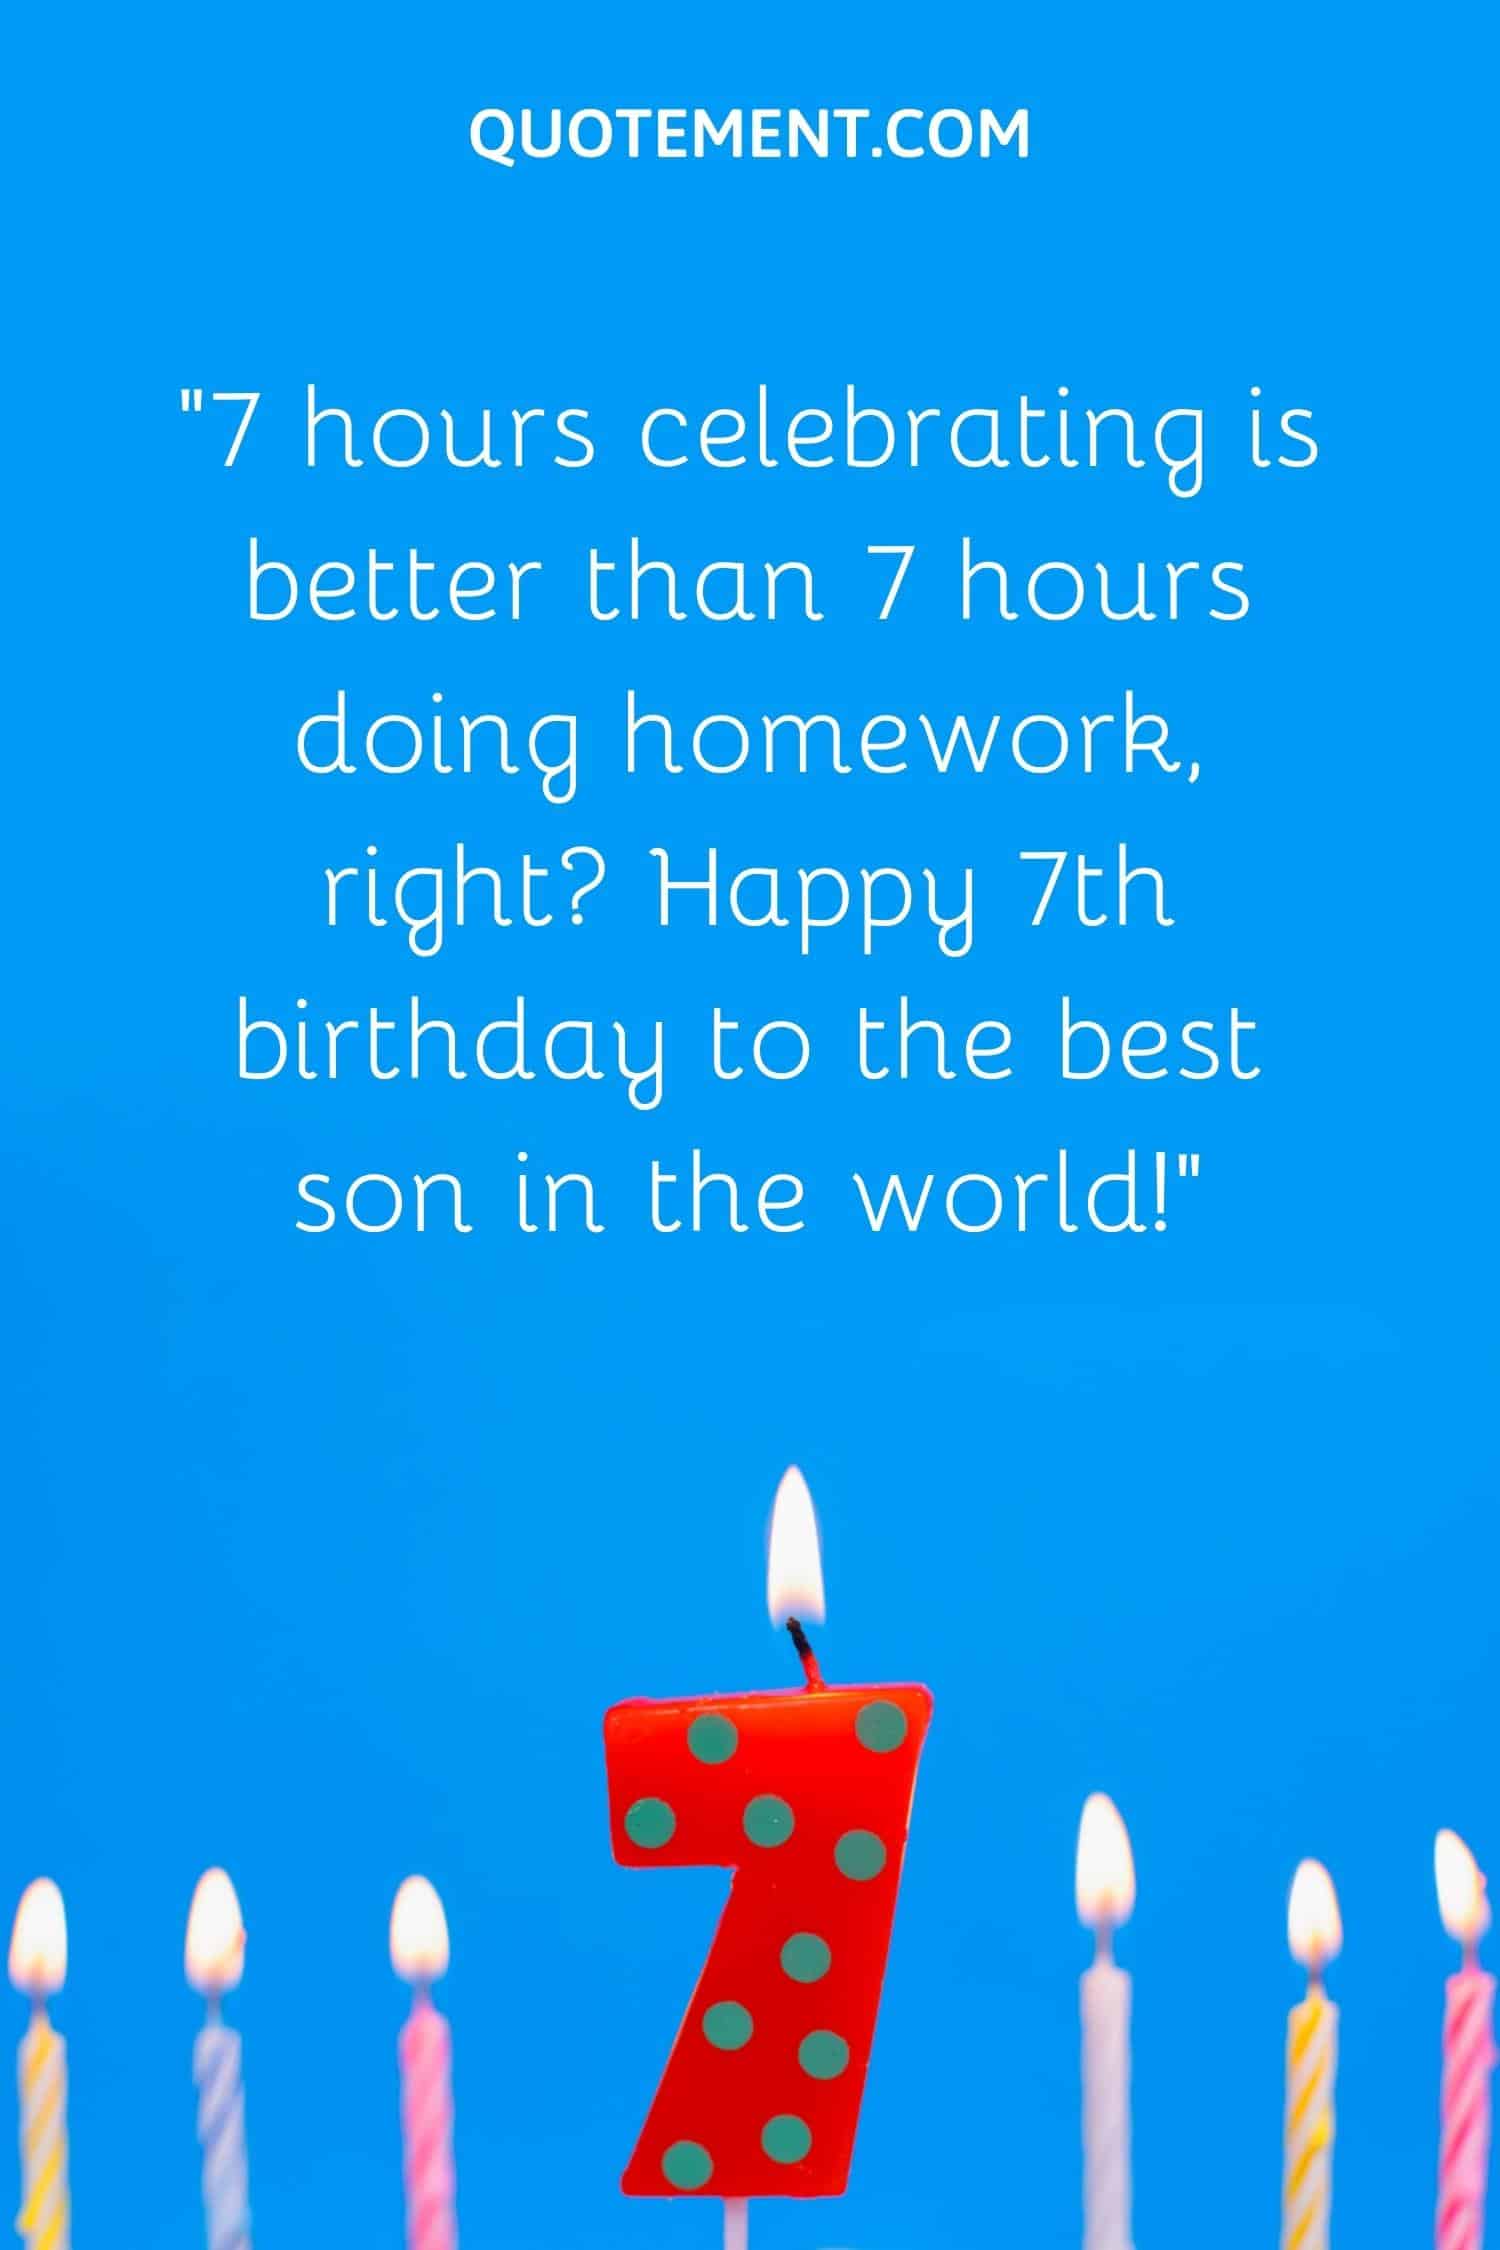 “7 hours celebrating is better than 7 hours doing homework, right Happy 7th birthday to the best son in the world!”